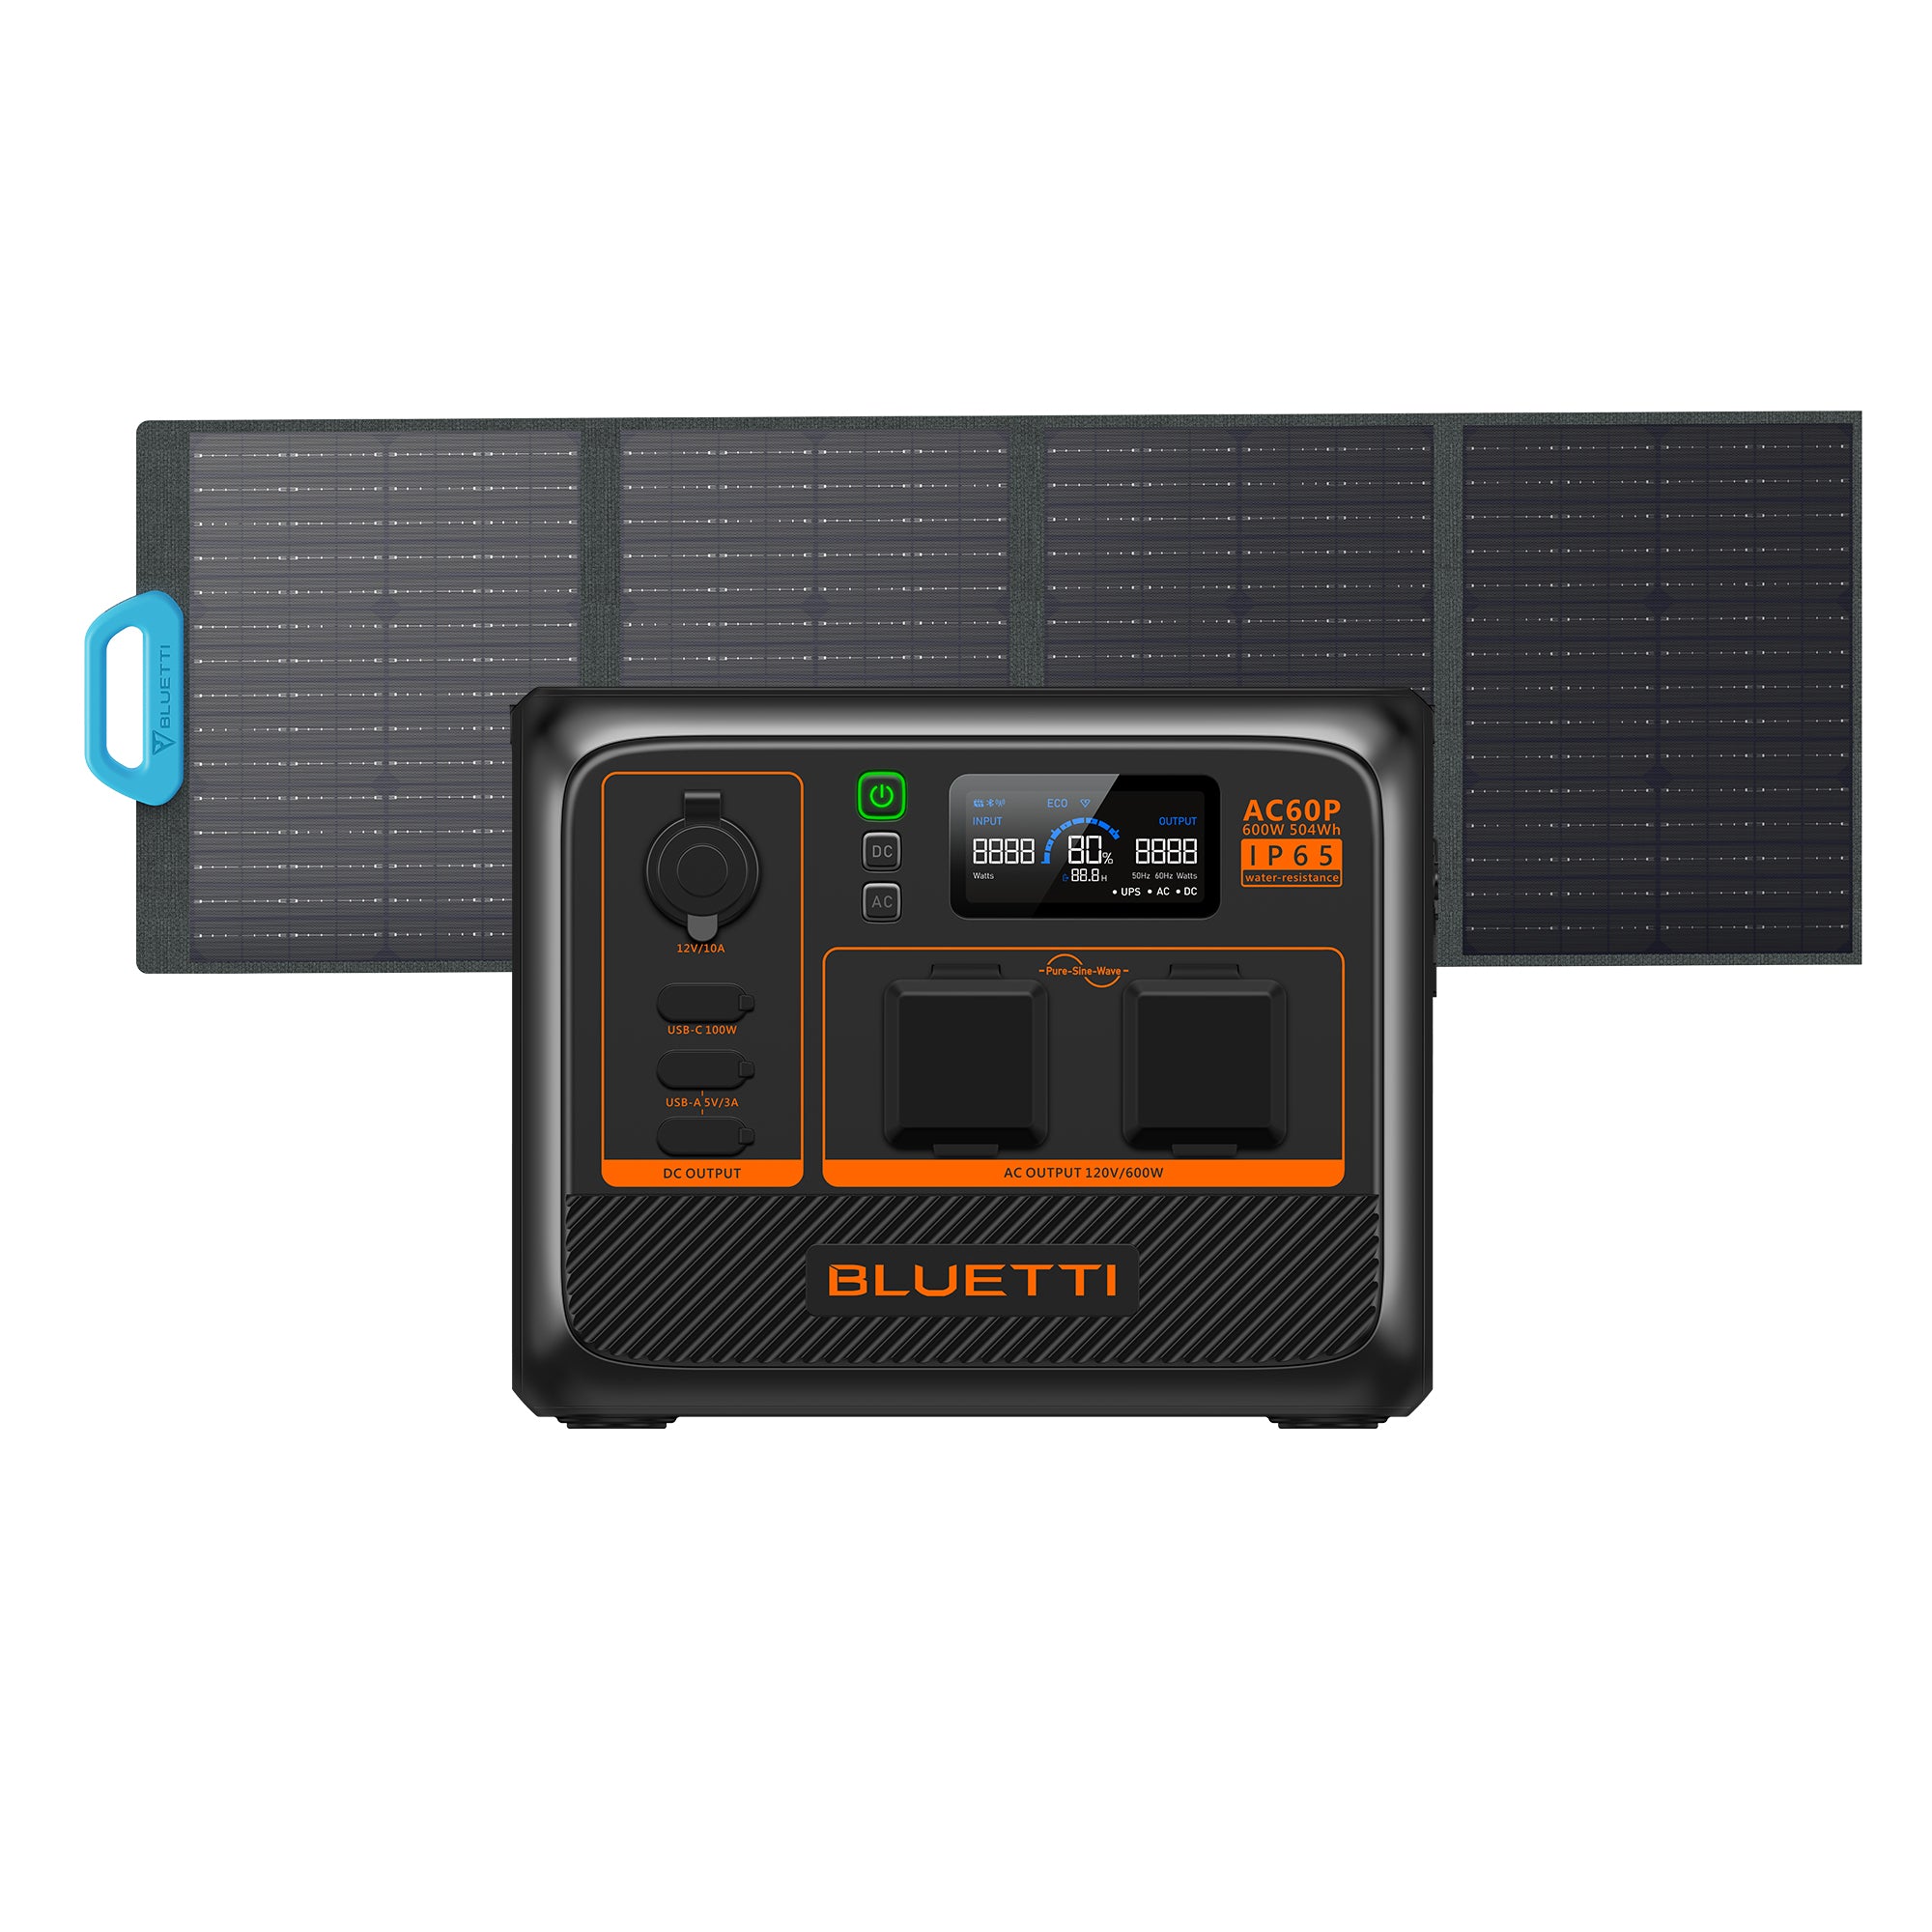 BLUETTI AC60 Portable Power Station For Camping/ 600W 403Wh, 4 Ways To Recharge (AC/Solar/Car/Lead-Acid Battery) AC60P+PV120 / 600W,504Wh,120W Solar